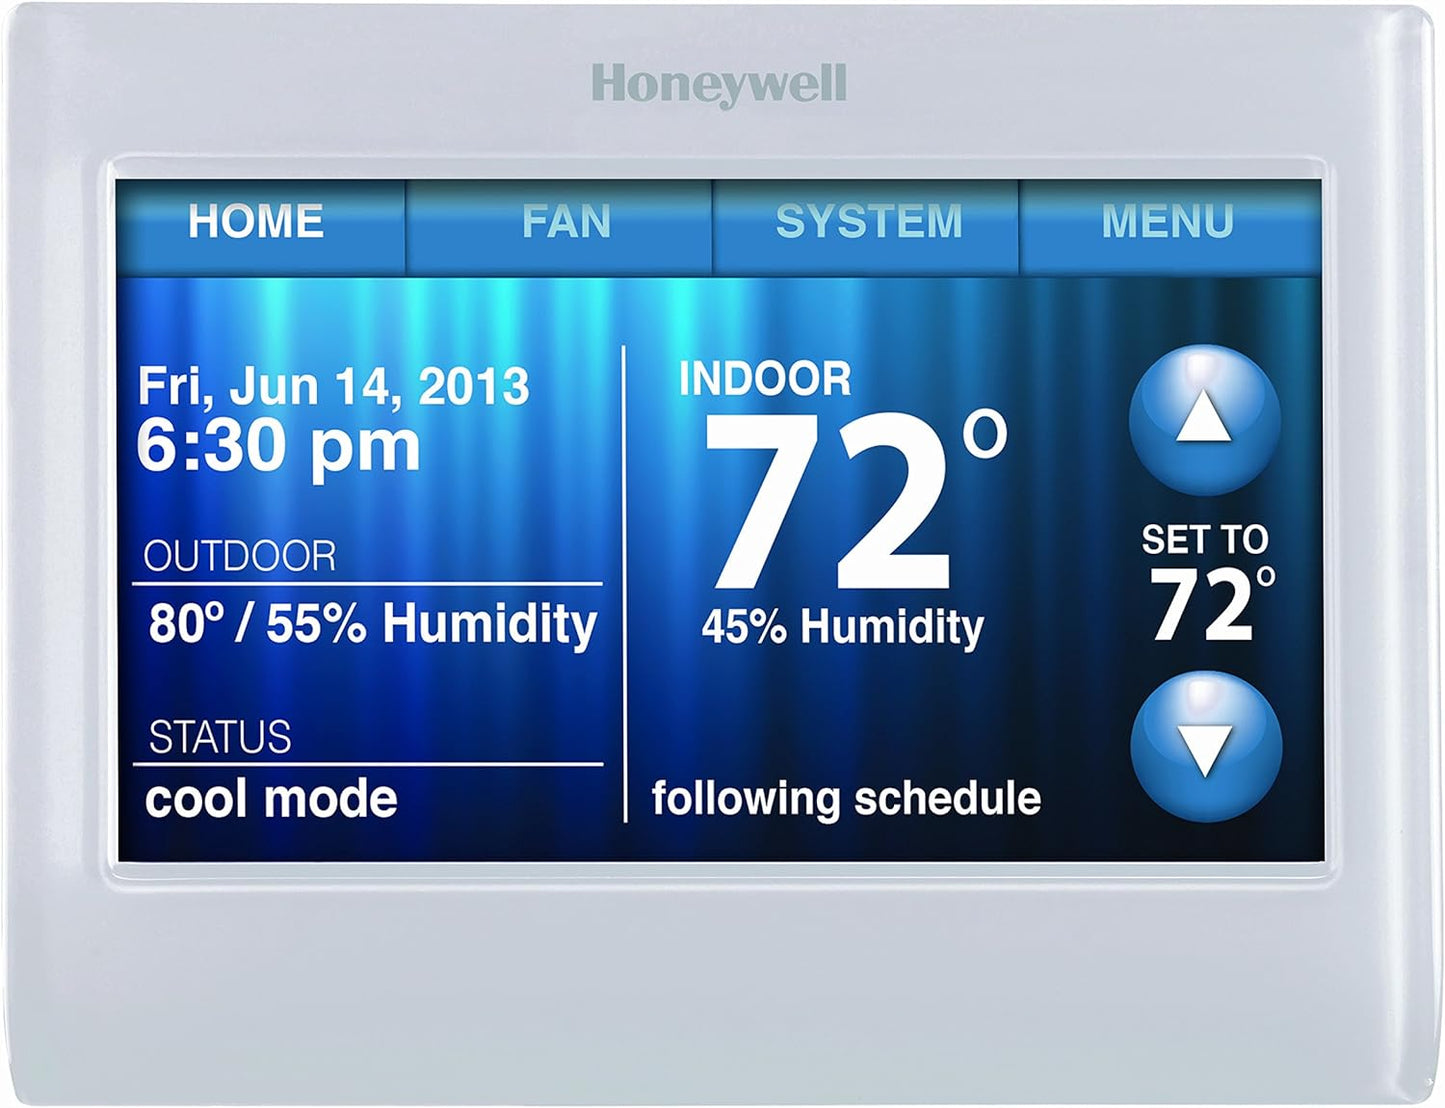 Honeywell TH9320WF5003 Colour Touch Screen WIFI Thermostat